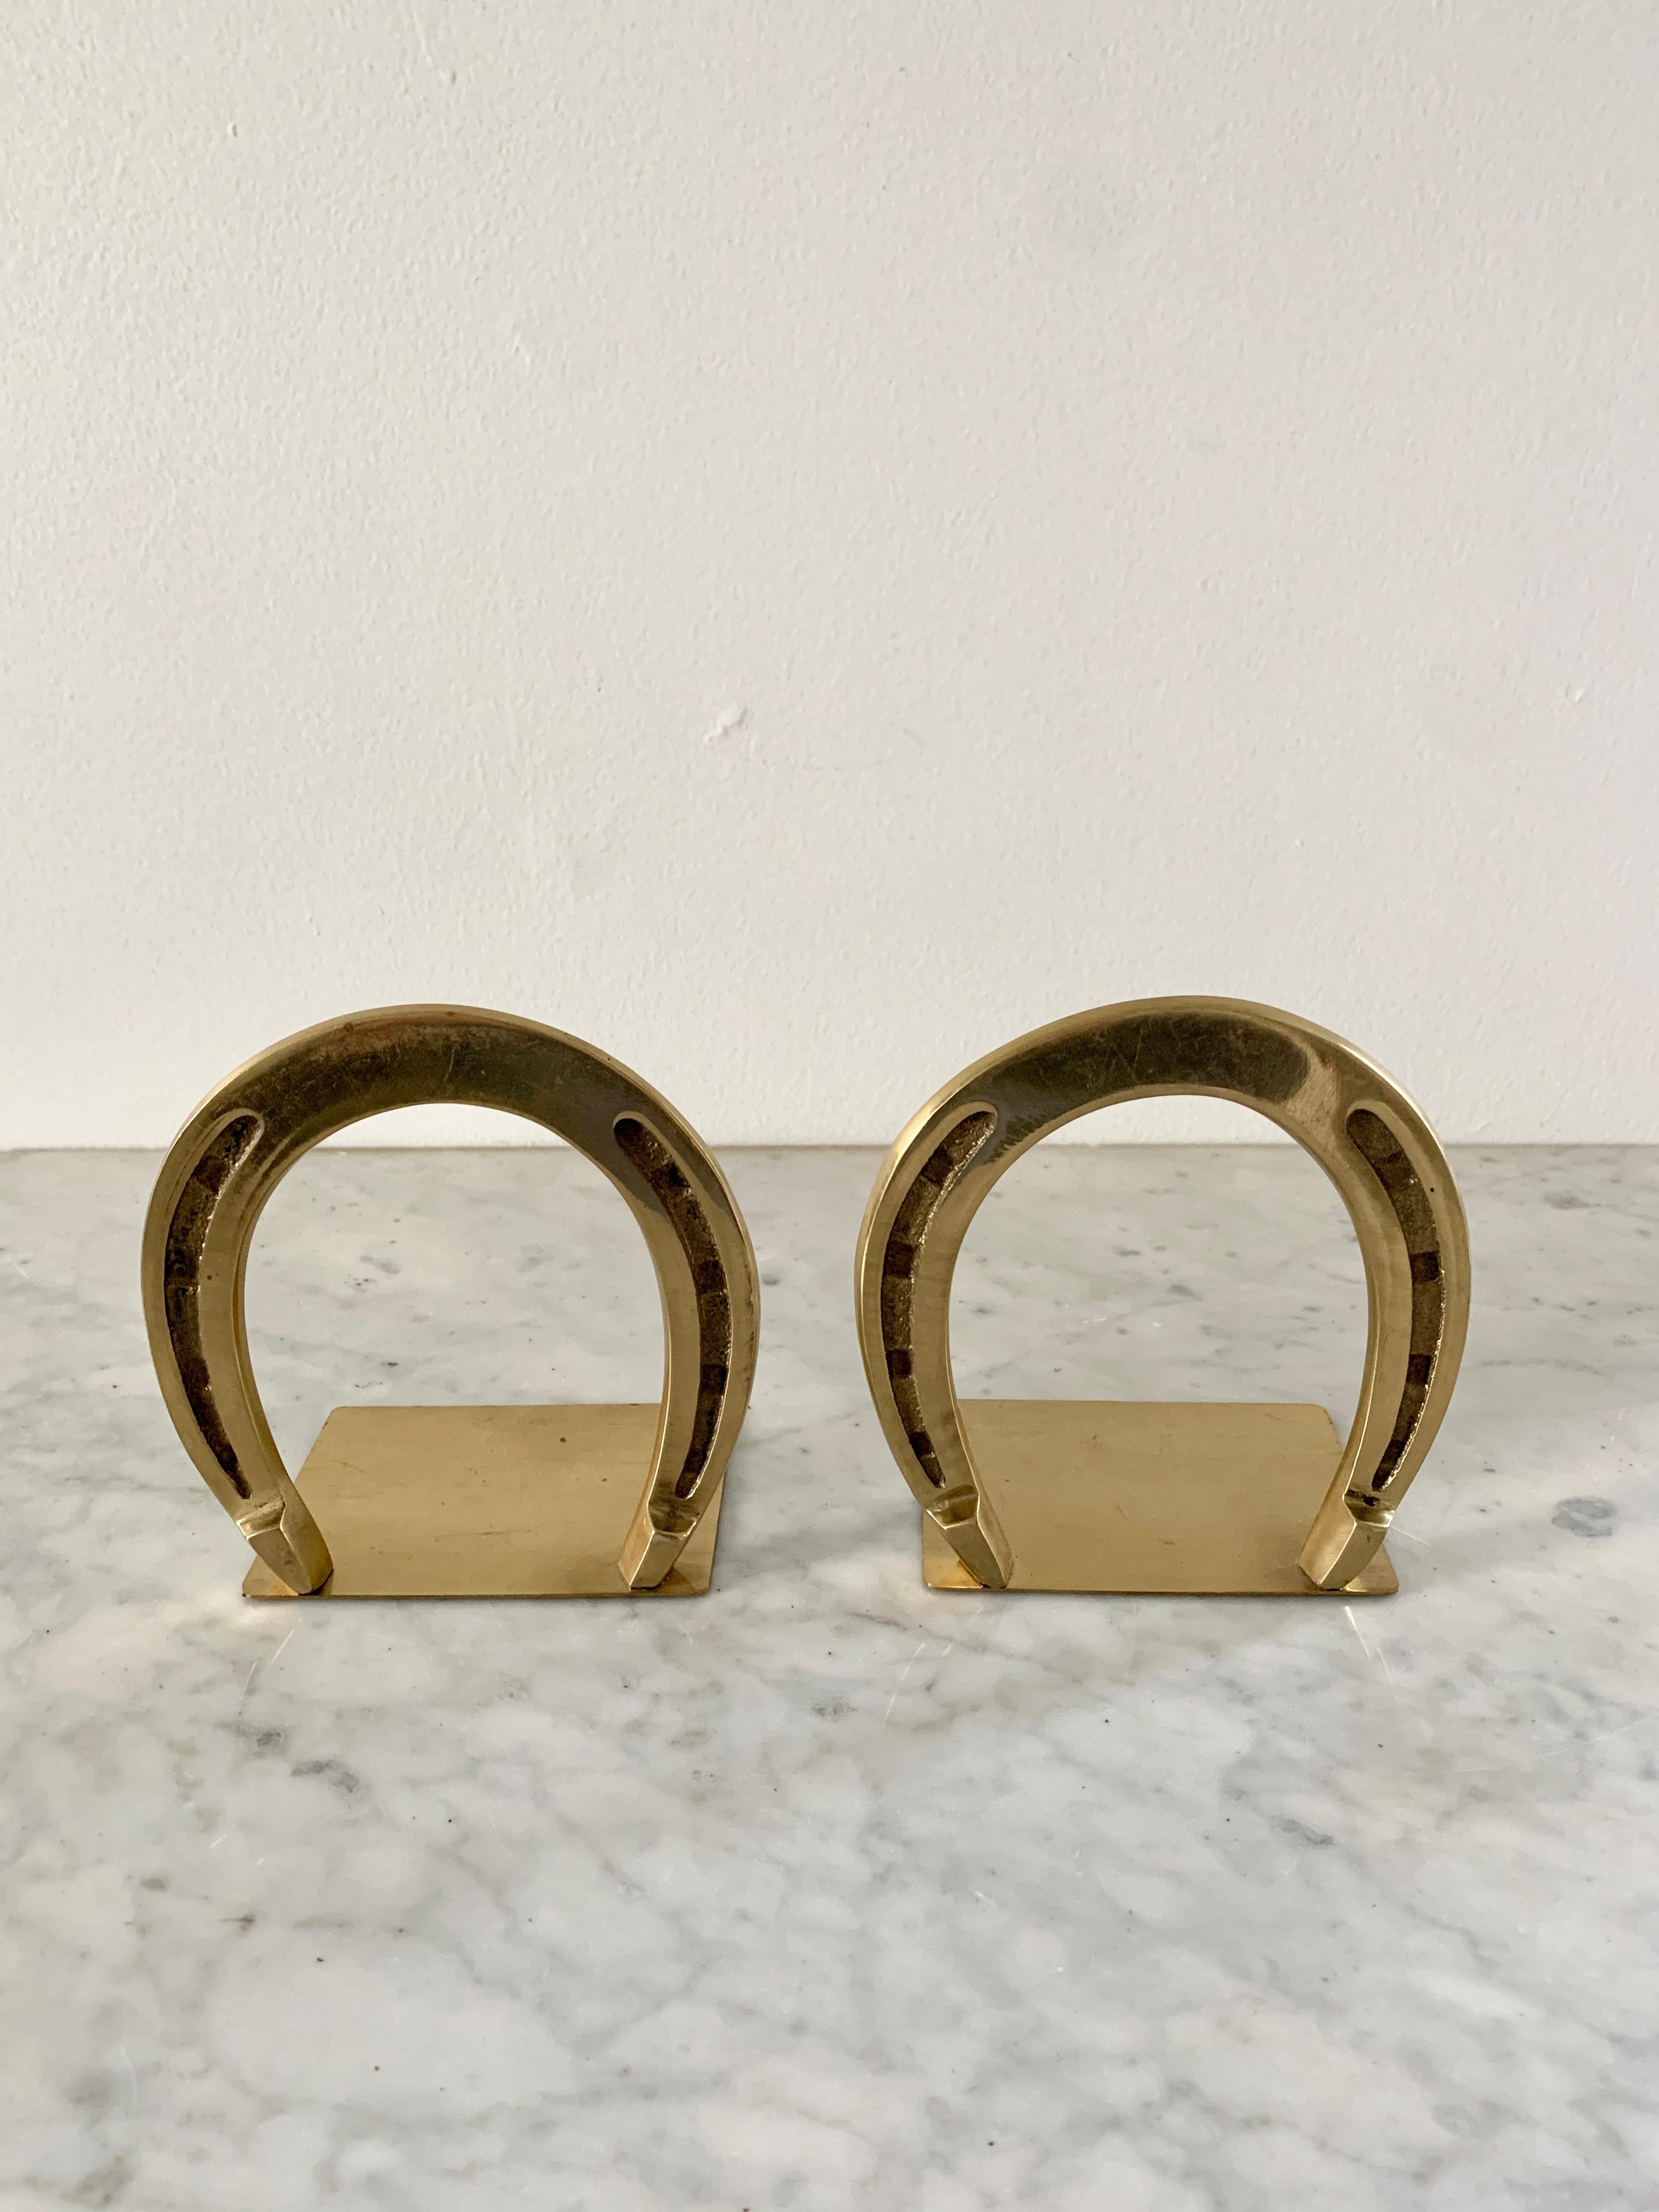 Solid Cast Brass Horseshoe Bookends In Good Condition For Sale In Elkhart, IN